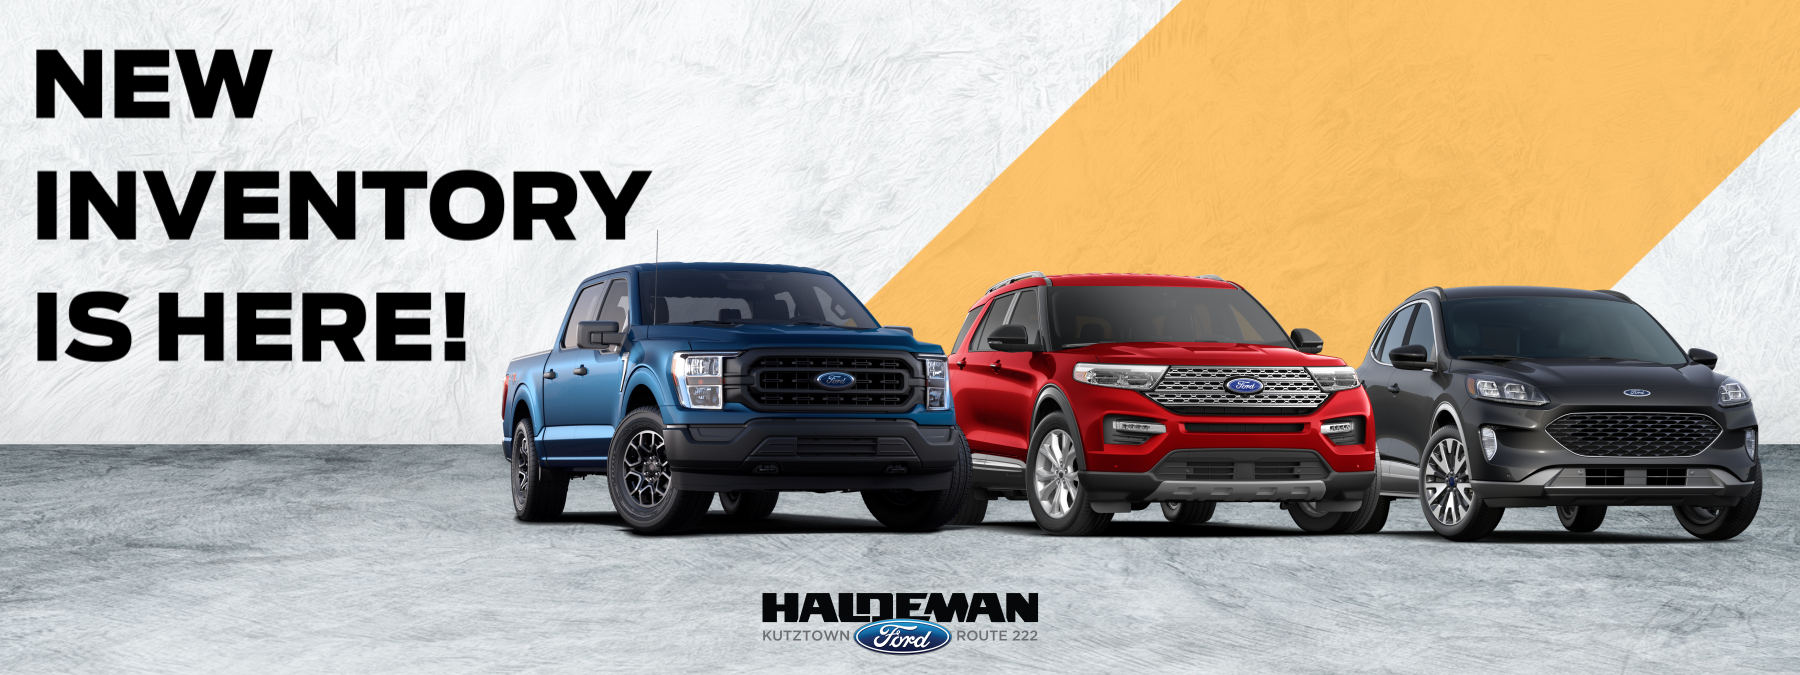 New Inventory Is Here At Haldeman Ford Kutztown!